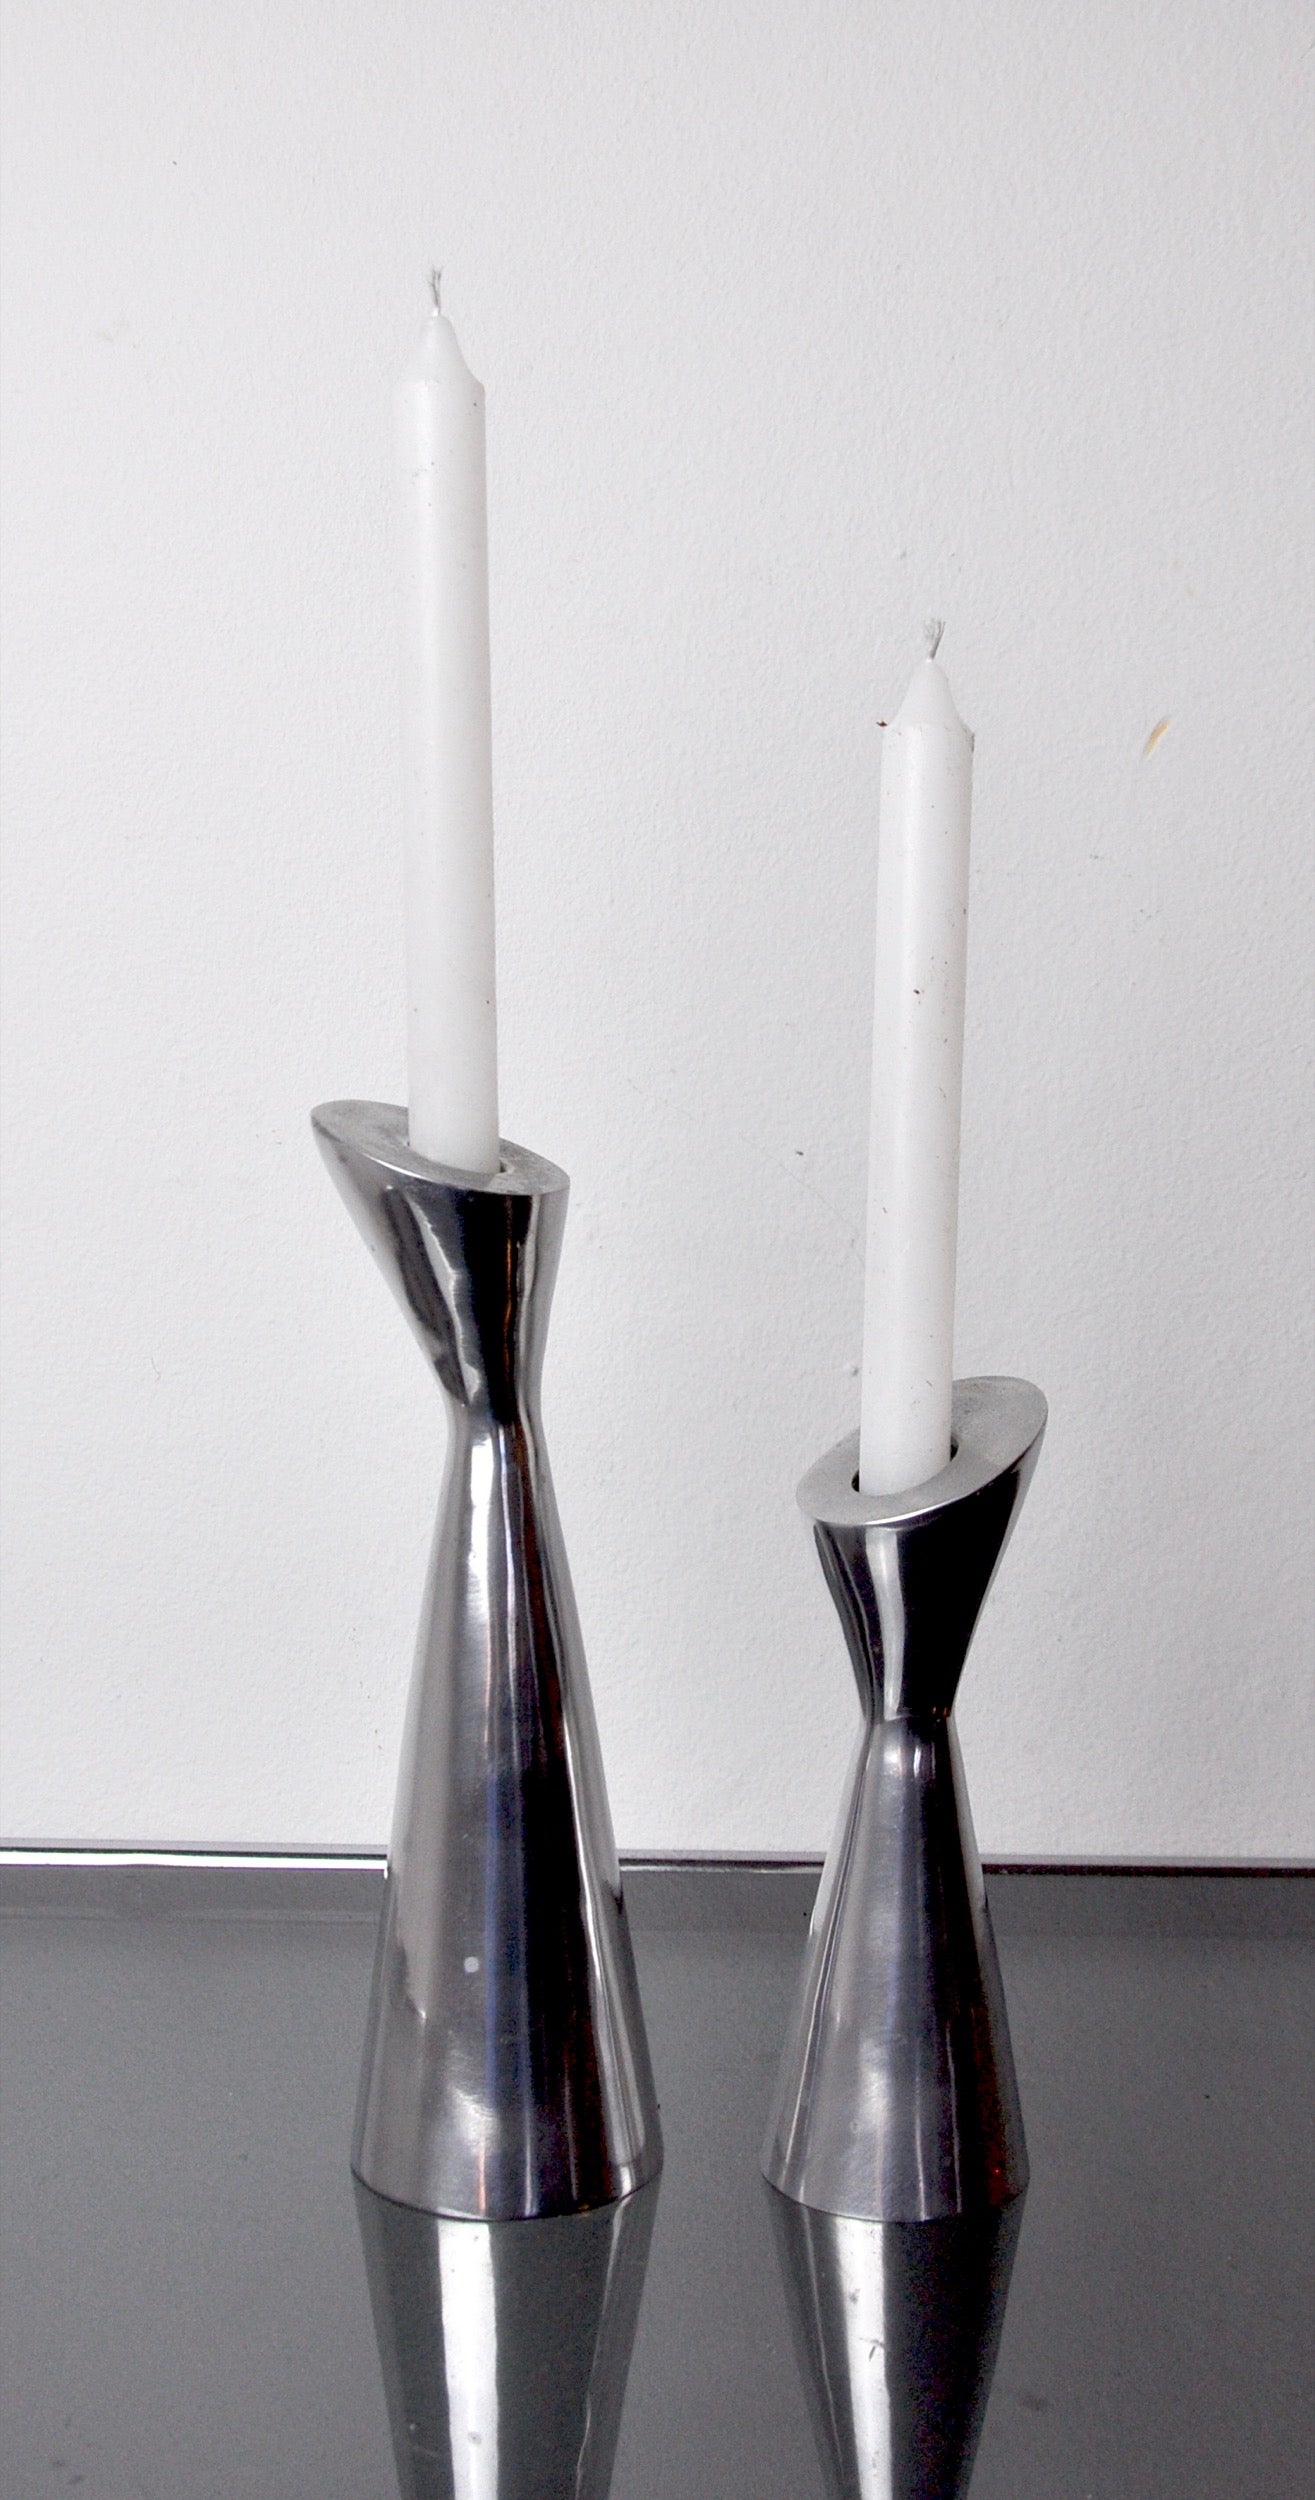 Pair of swam candlesticks designed and produced by Matthew Hilton for scp england in england in the 1980s.

Set of two aluminum candle holders reminiscent of the shape of swans.

Beautiful decorative objects that will bring a real design touch